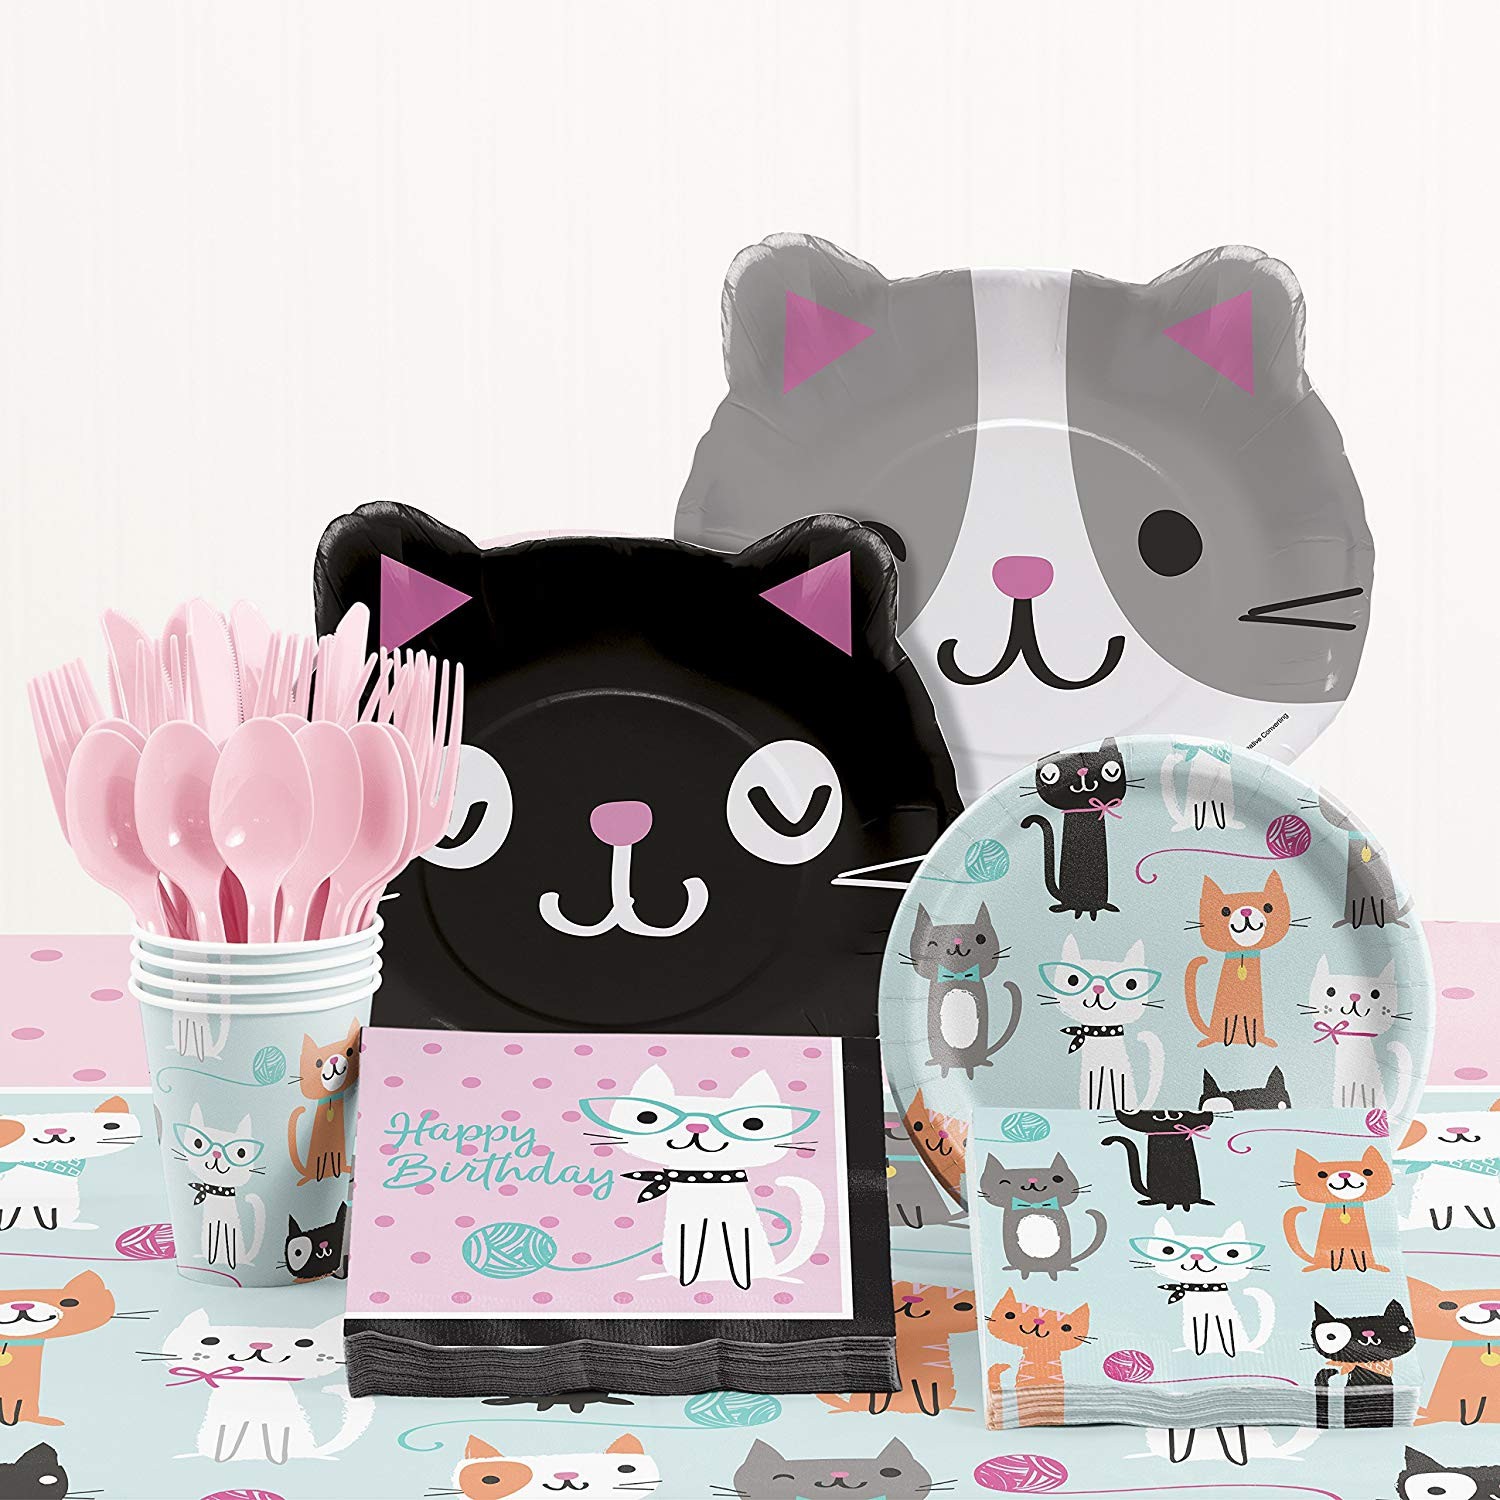 Cat Birthday Decorations
 Creative Converting Purr fect Cat Birthday Party Supplies